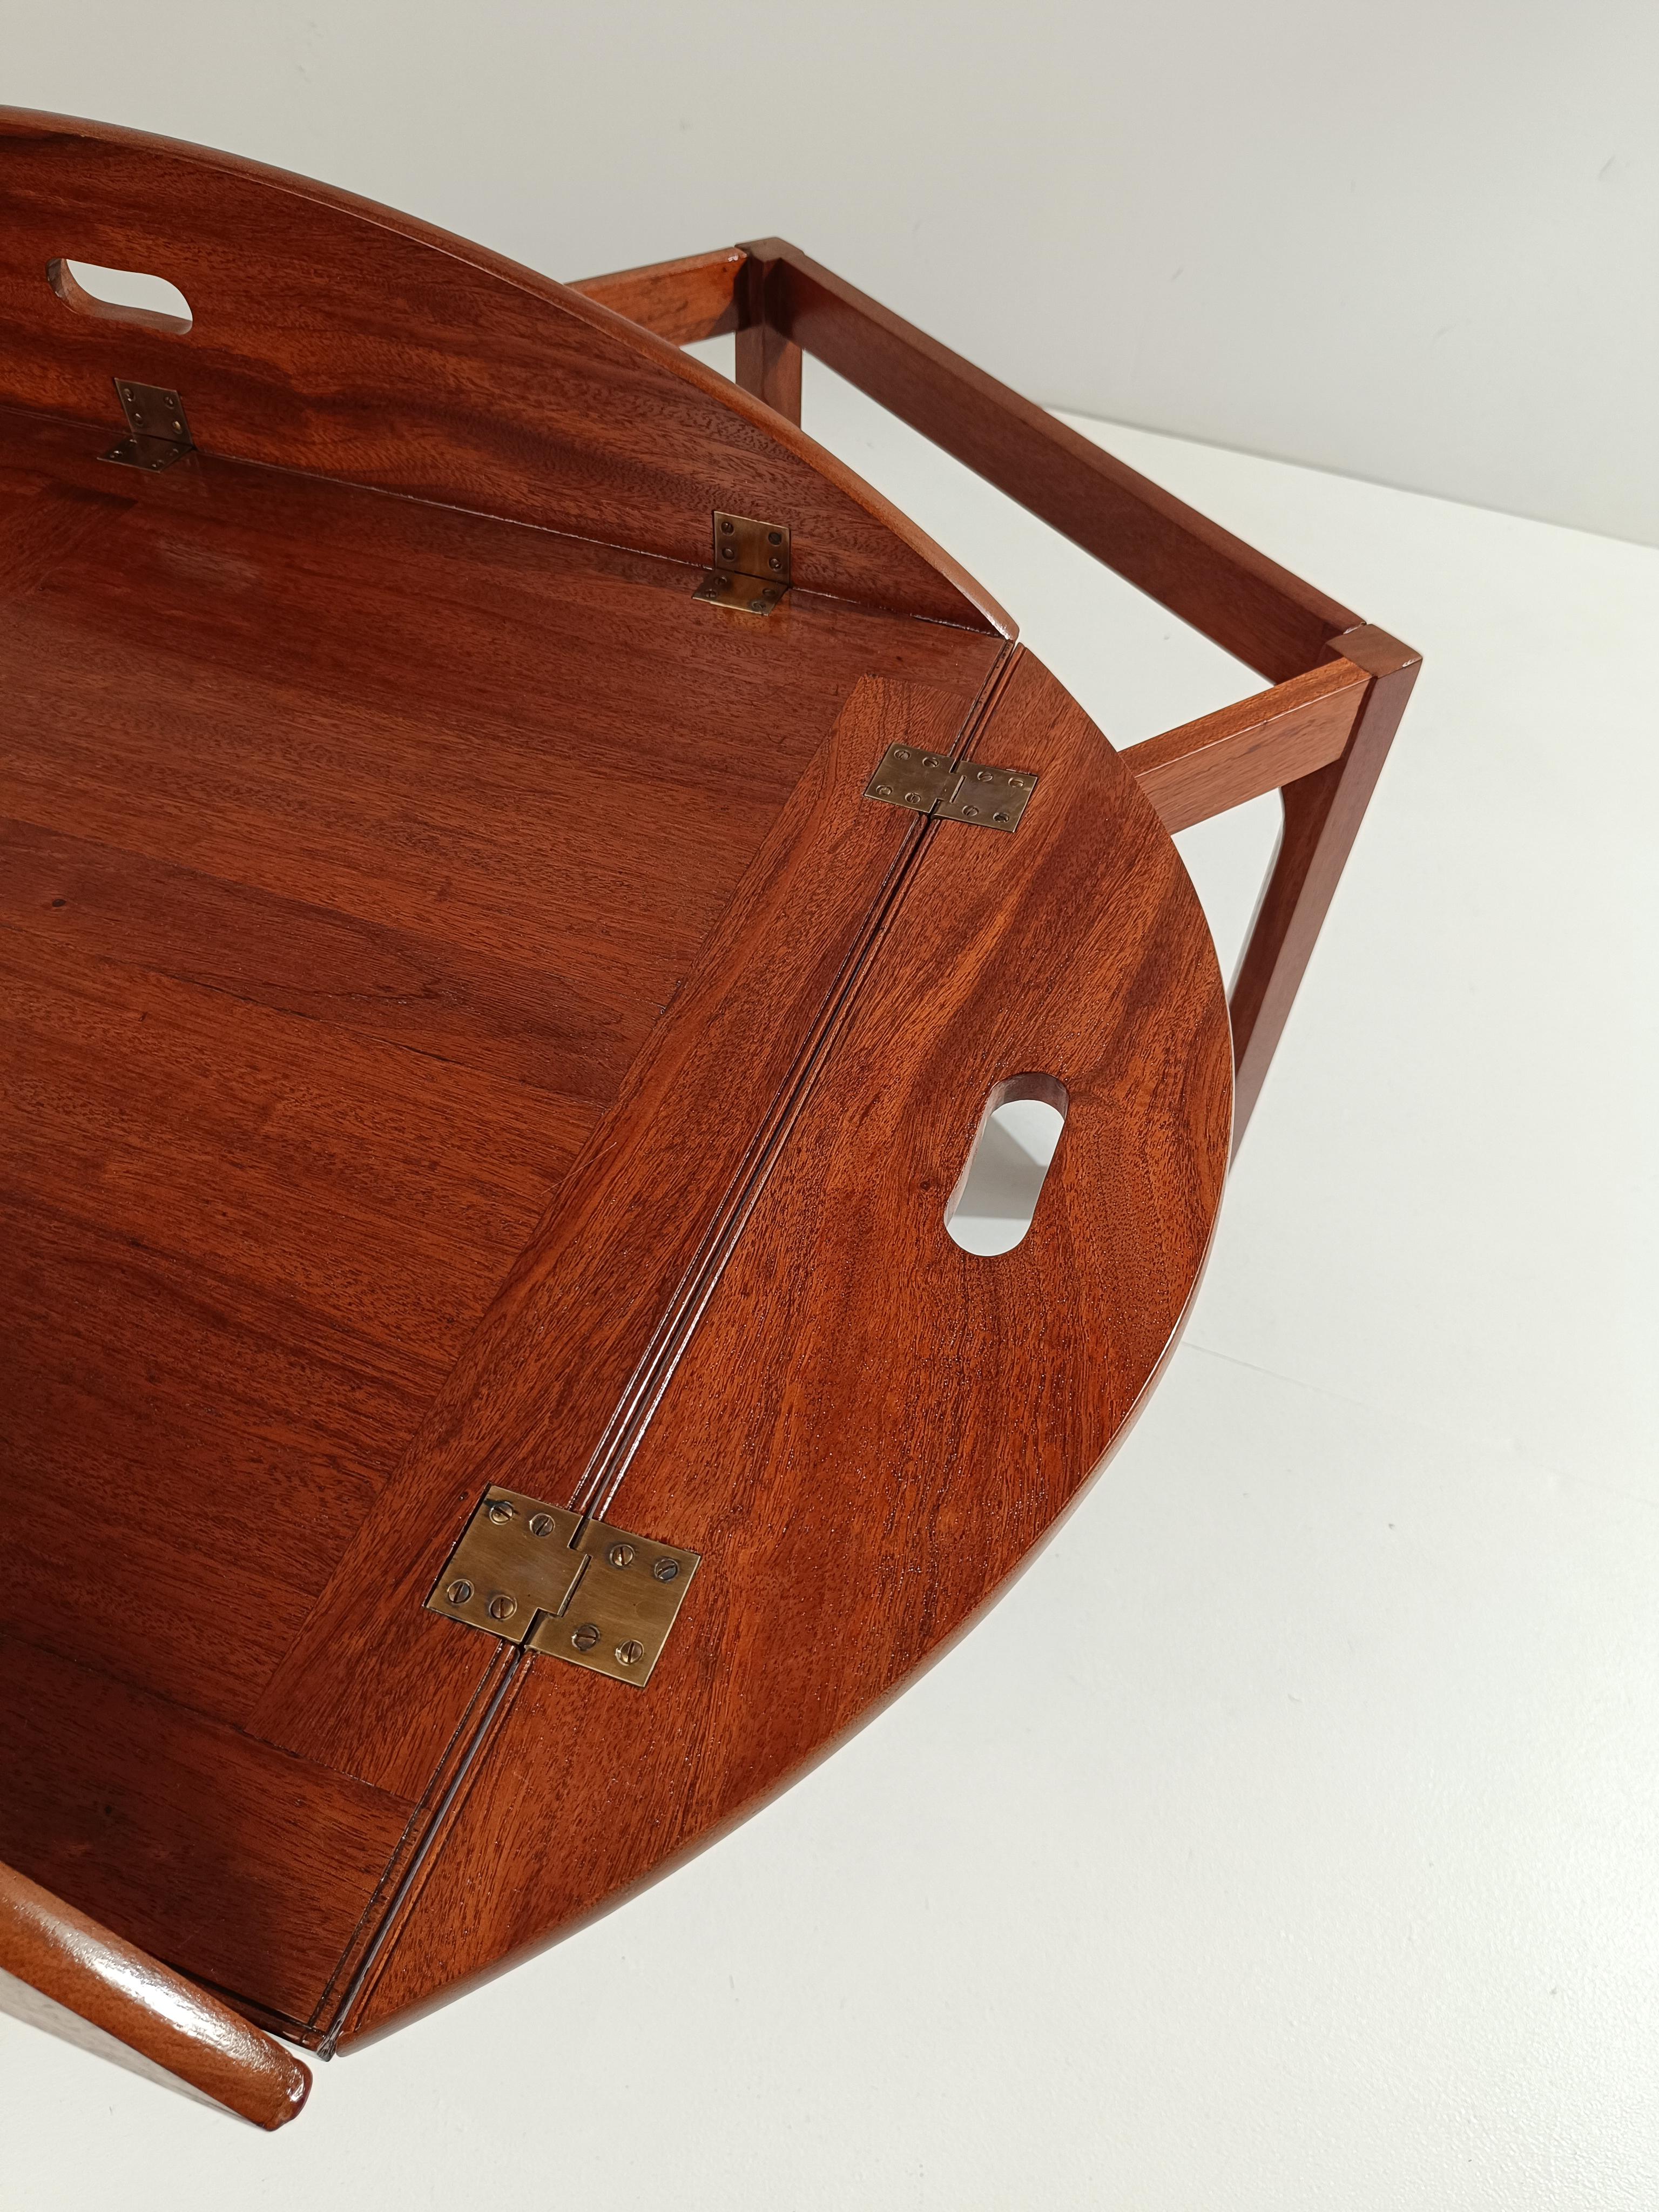 Vintage Oval Mahogany Butler's Coffee Tray Table in Georgian-style, Circa 1960s For Sale 12